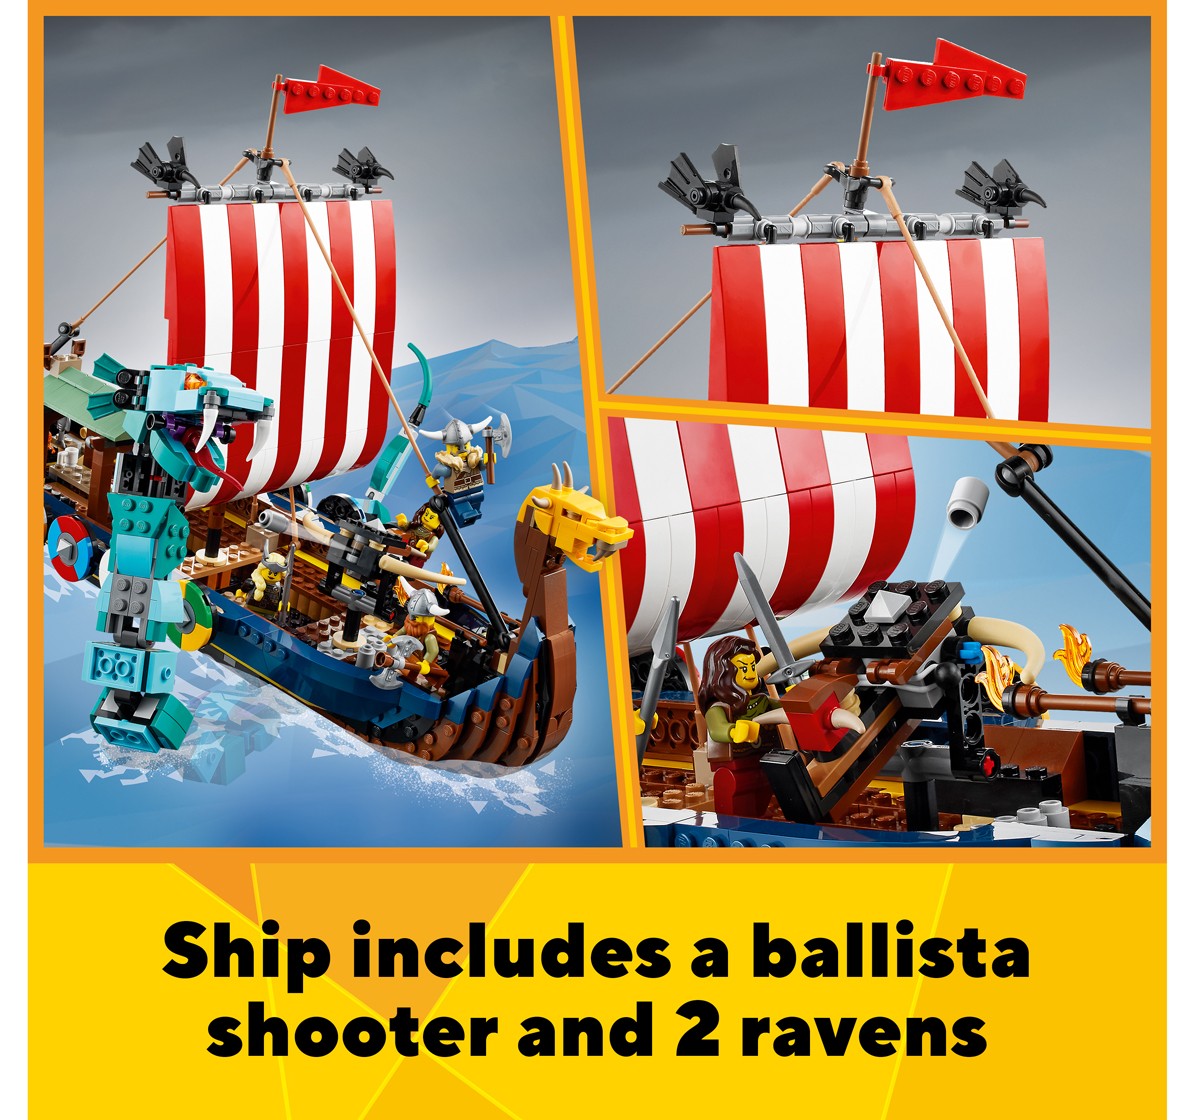 Lego Creator 3In1 Viking Ship And The Midgard Serpent Building Toy Set For Boys, Girls, And Kids Ages 9+ (1,192 Pieces)